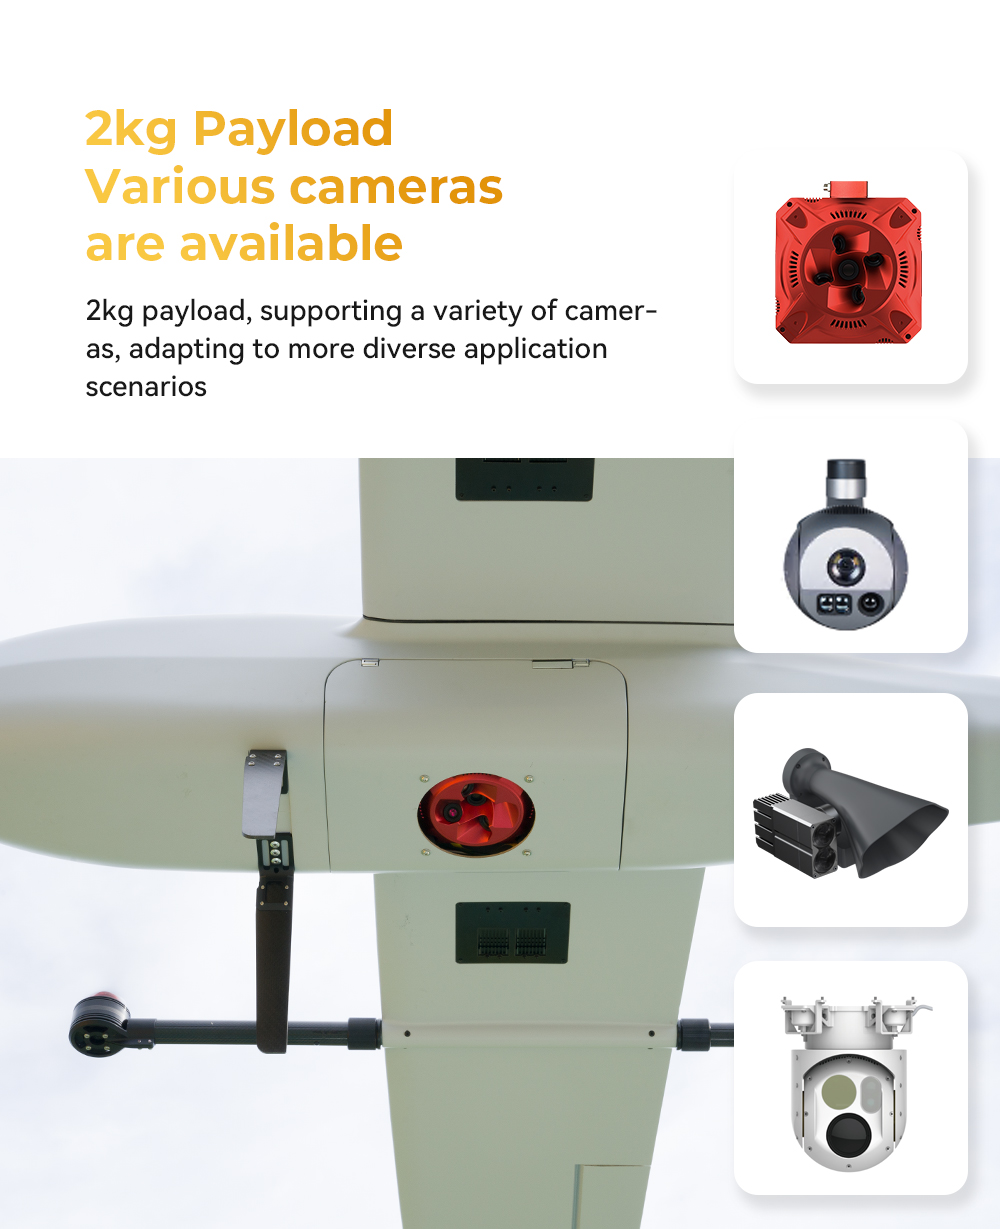 CUAV Raefly VT240 pro VTOL, 2kg Payload Various cameras are available 2kg payload, supporting a variety of